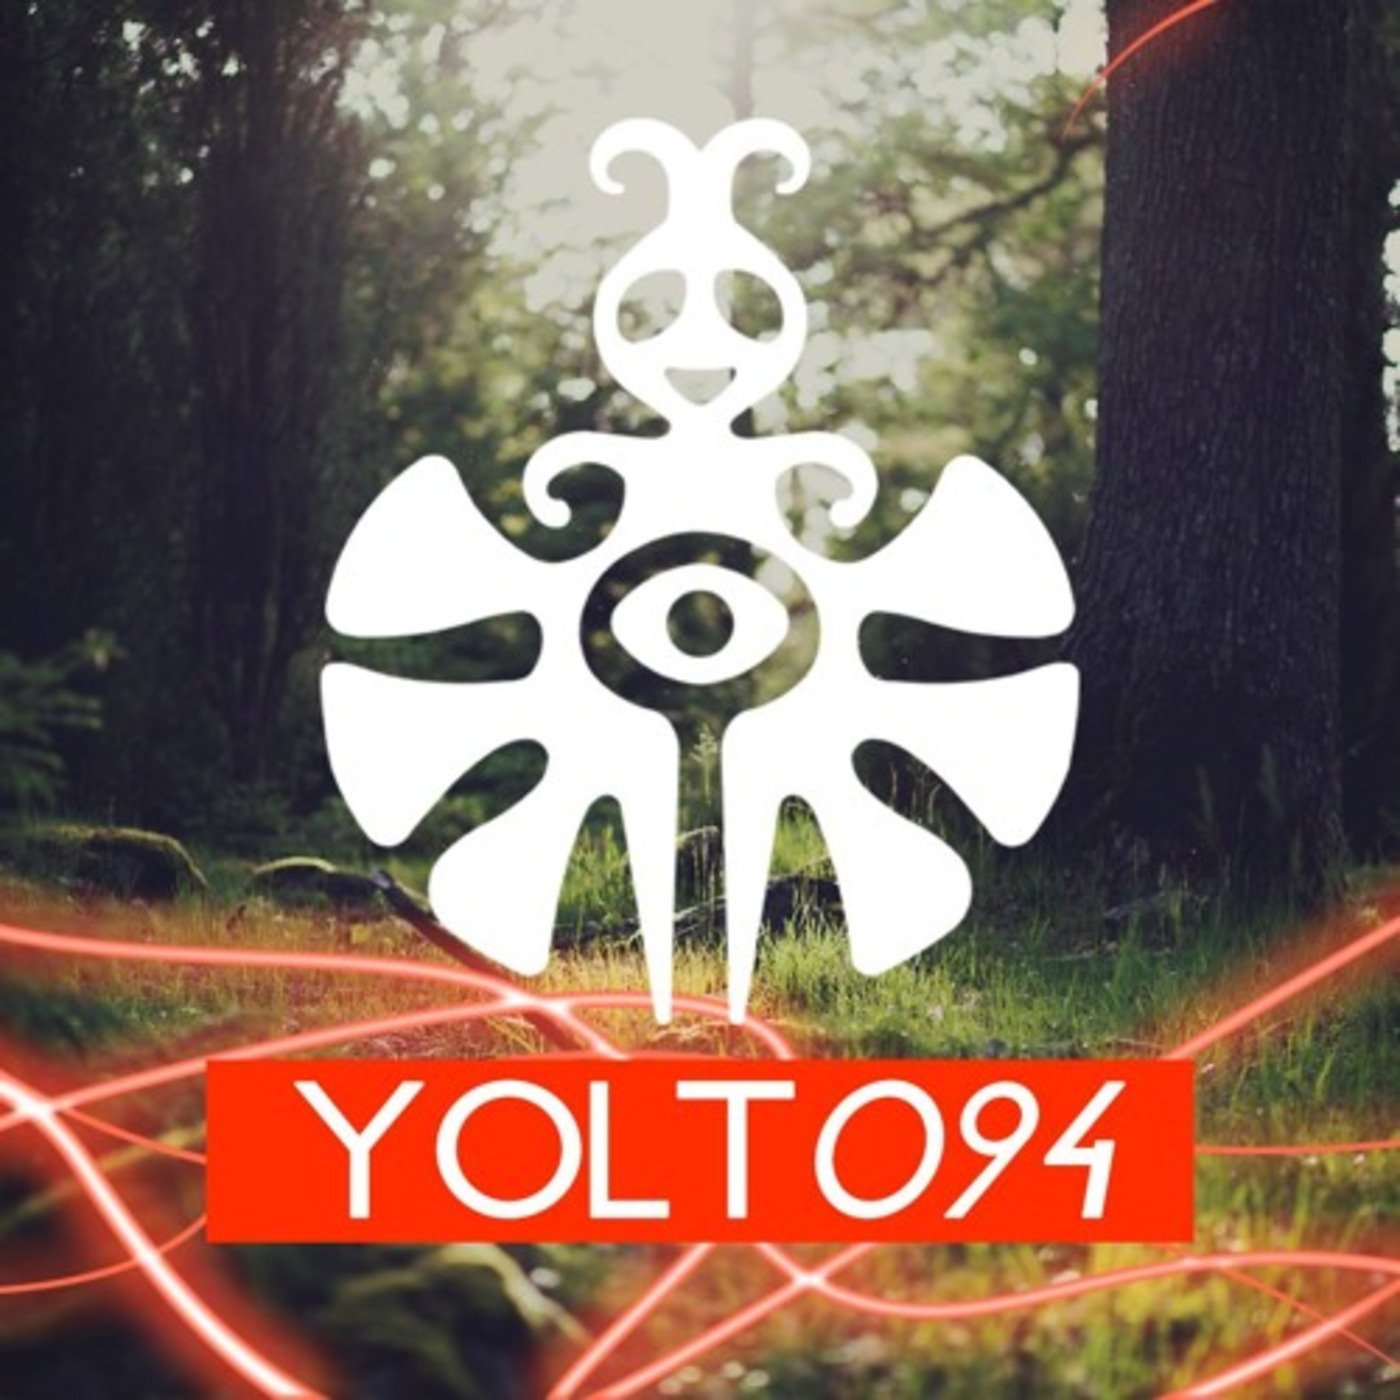 You Only Live Trance Episode 094 (#YOLT094) - Ness